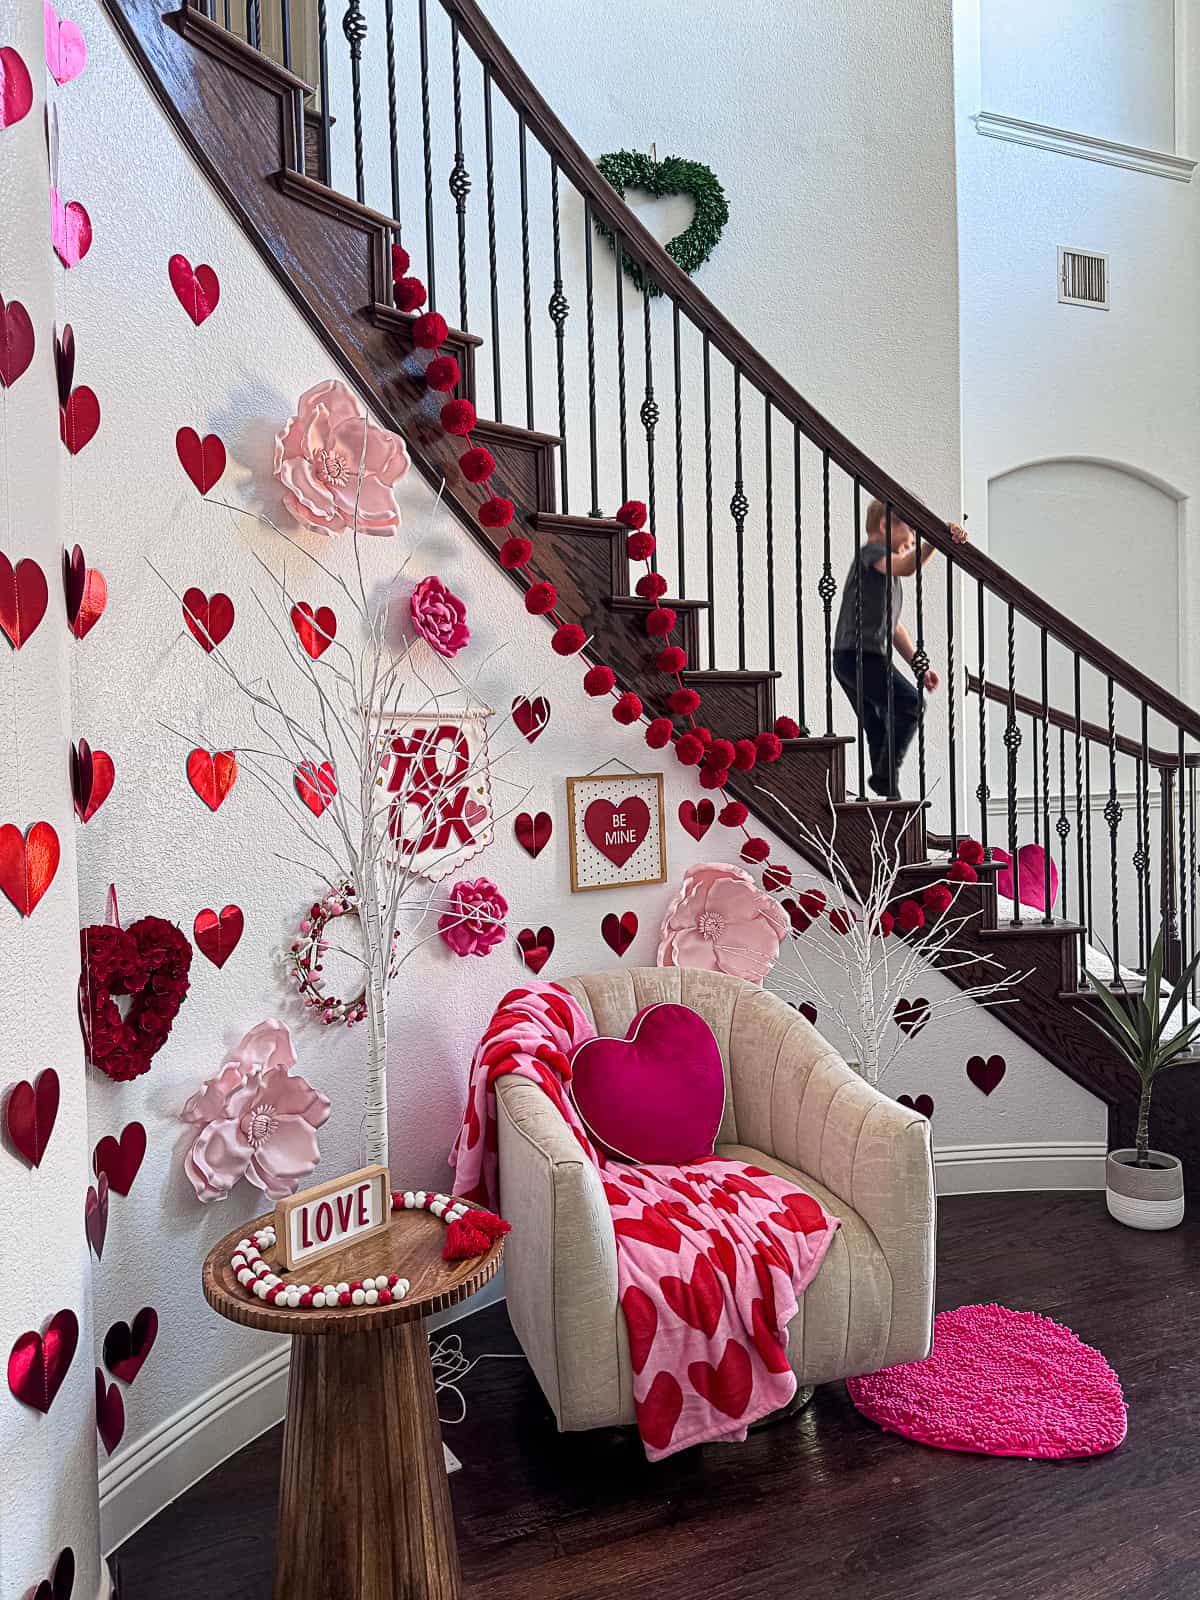 Stairway decorated for Valentine's Day